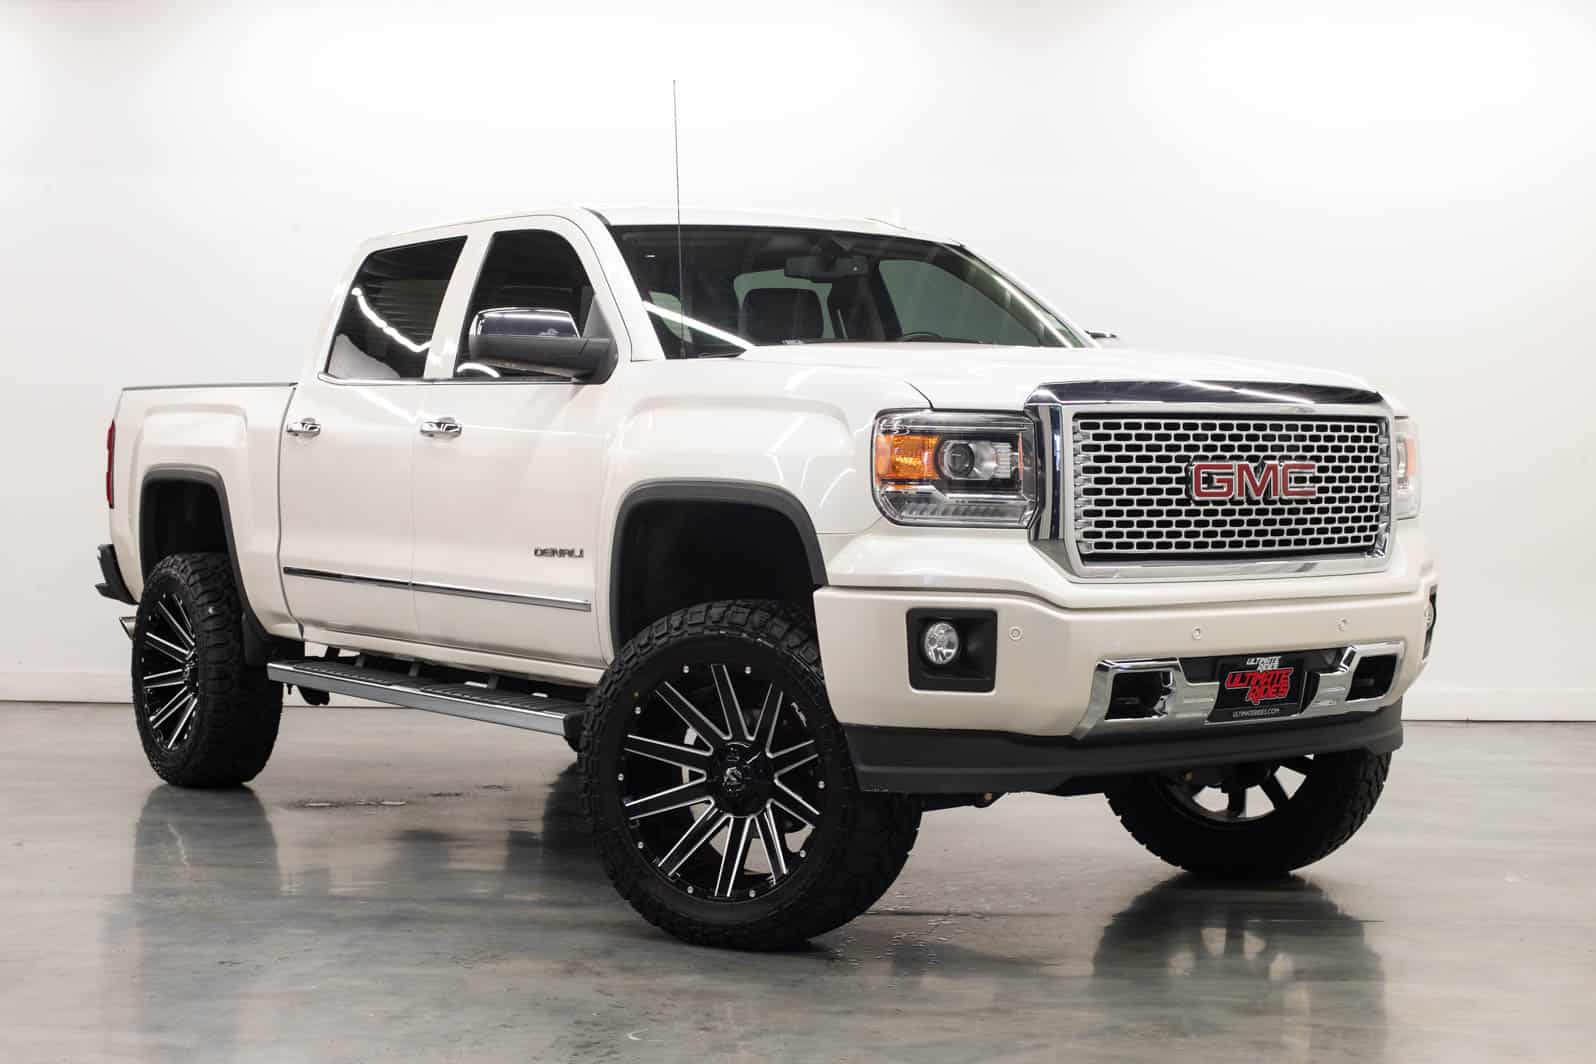 Lifted GMC Denali for Sale